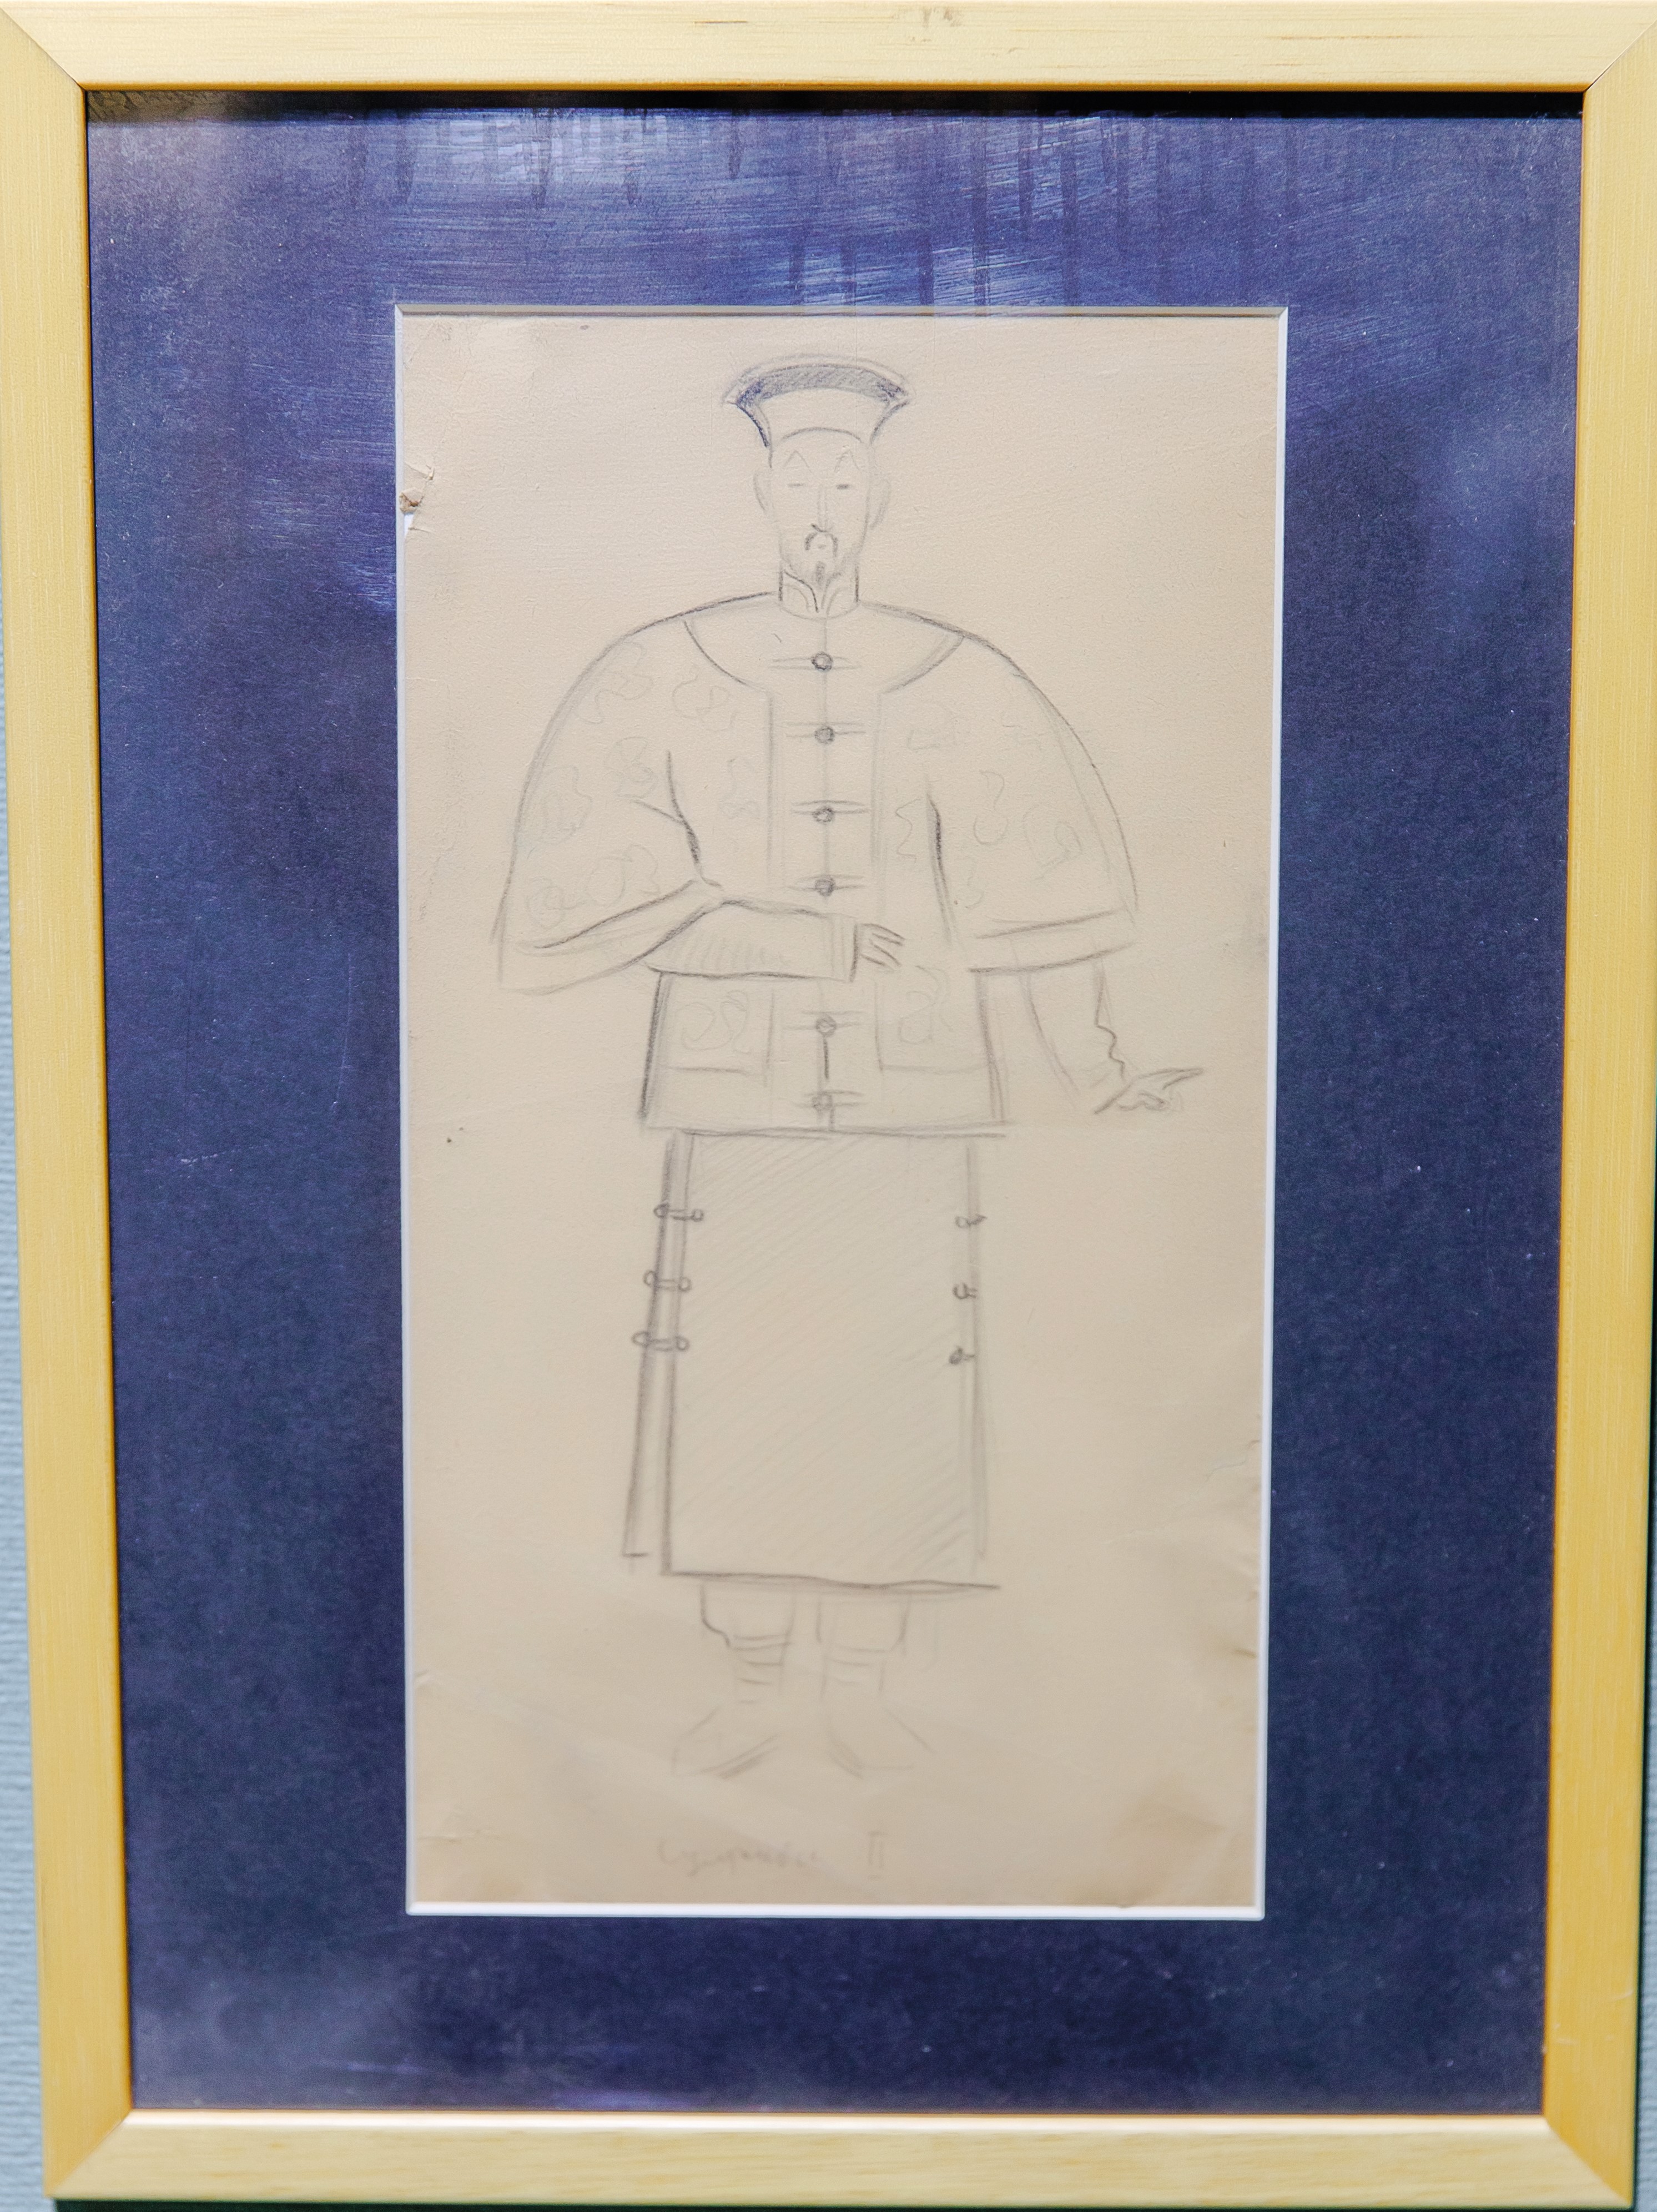 «Sultanbi II». Sketch of the costume for the performance of the Uighur theater